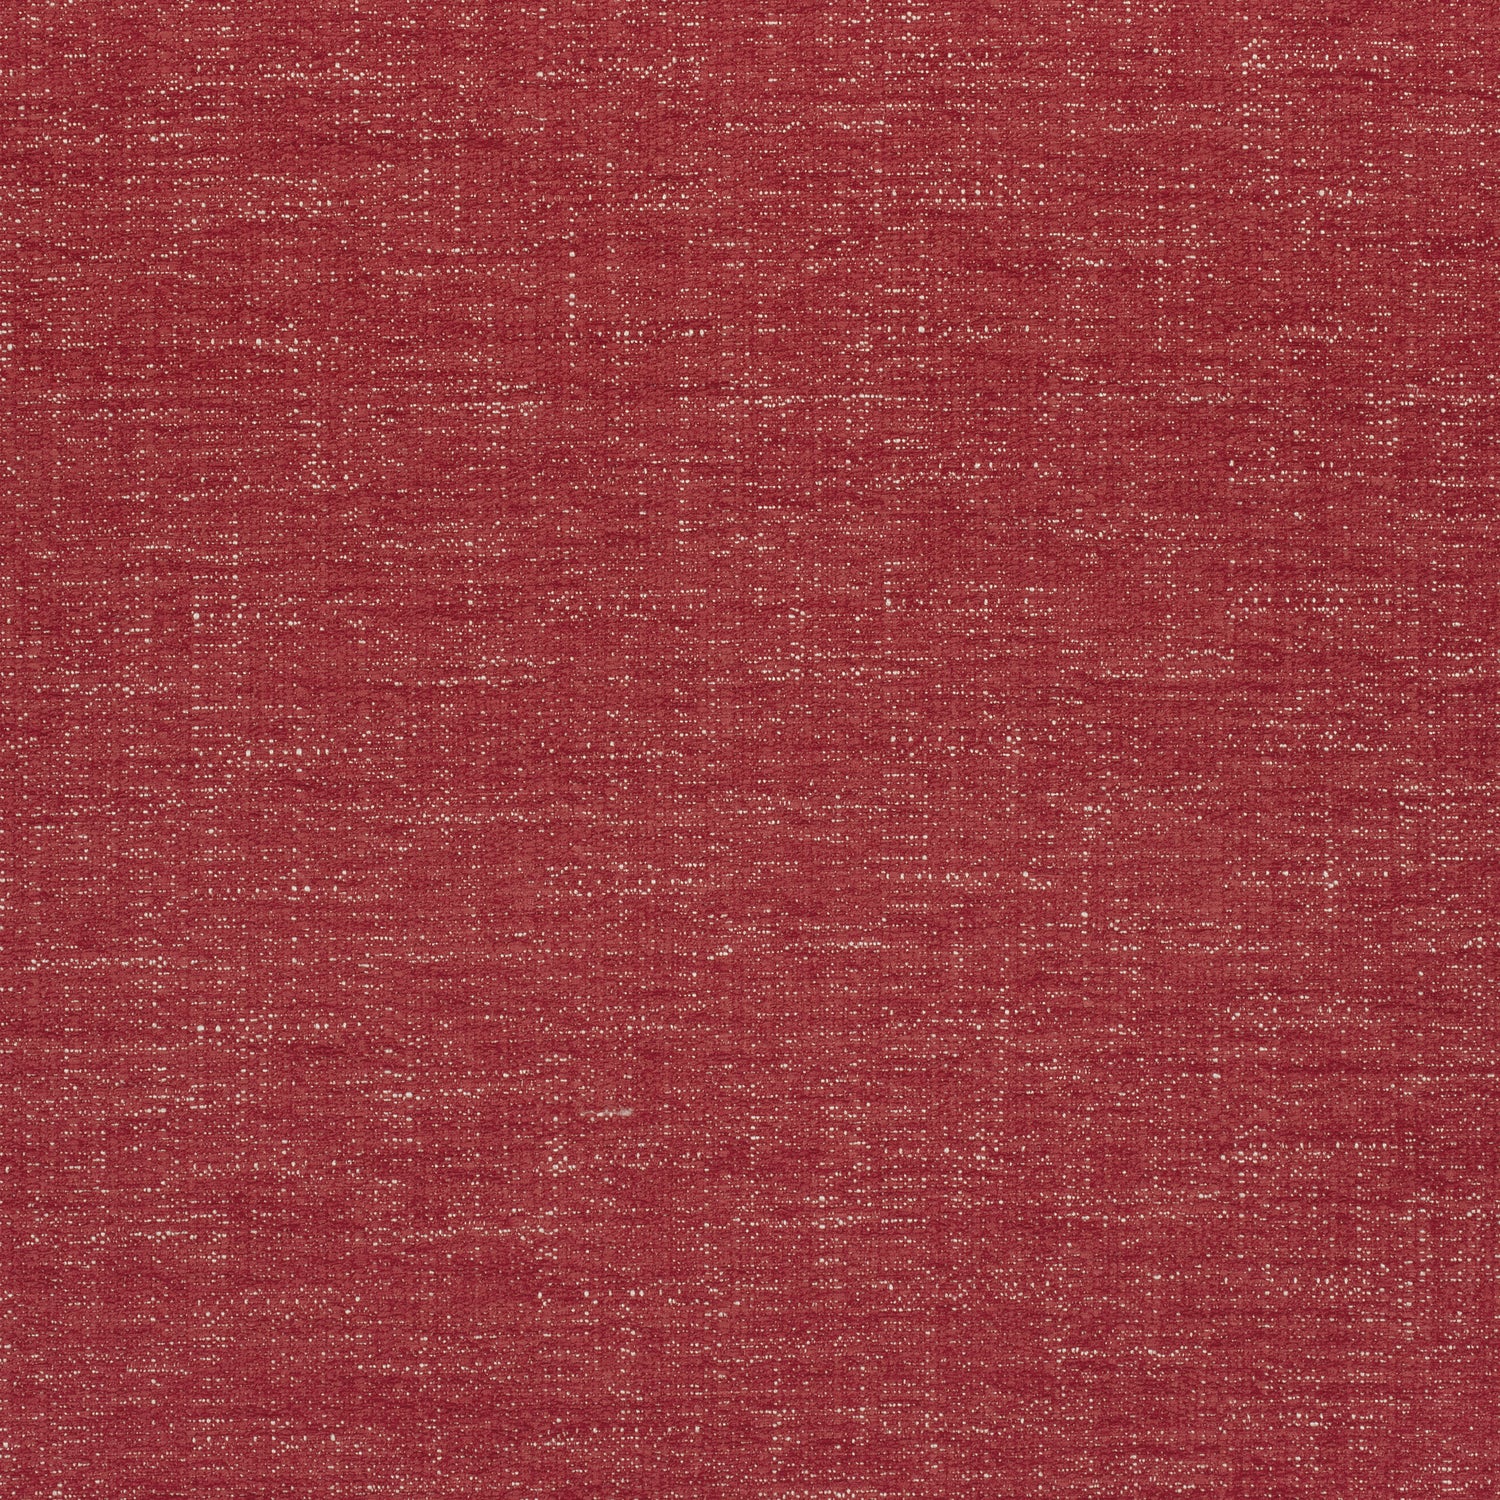 Vista fabric in cranberry color - pattern number W73382 - by Thibaut in the Landmark Textures collection